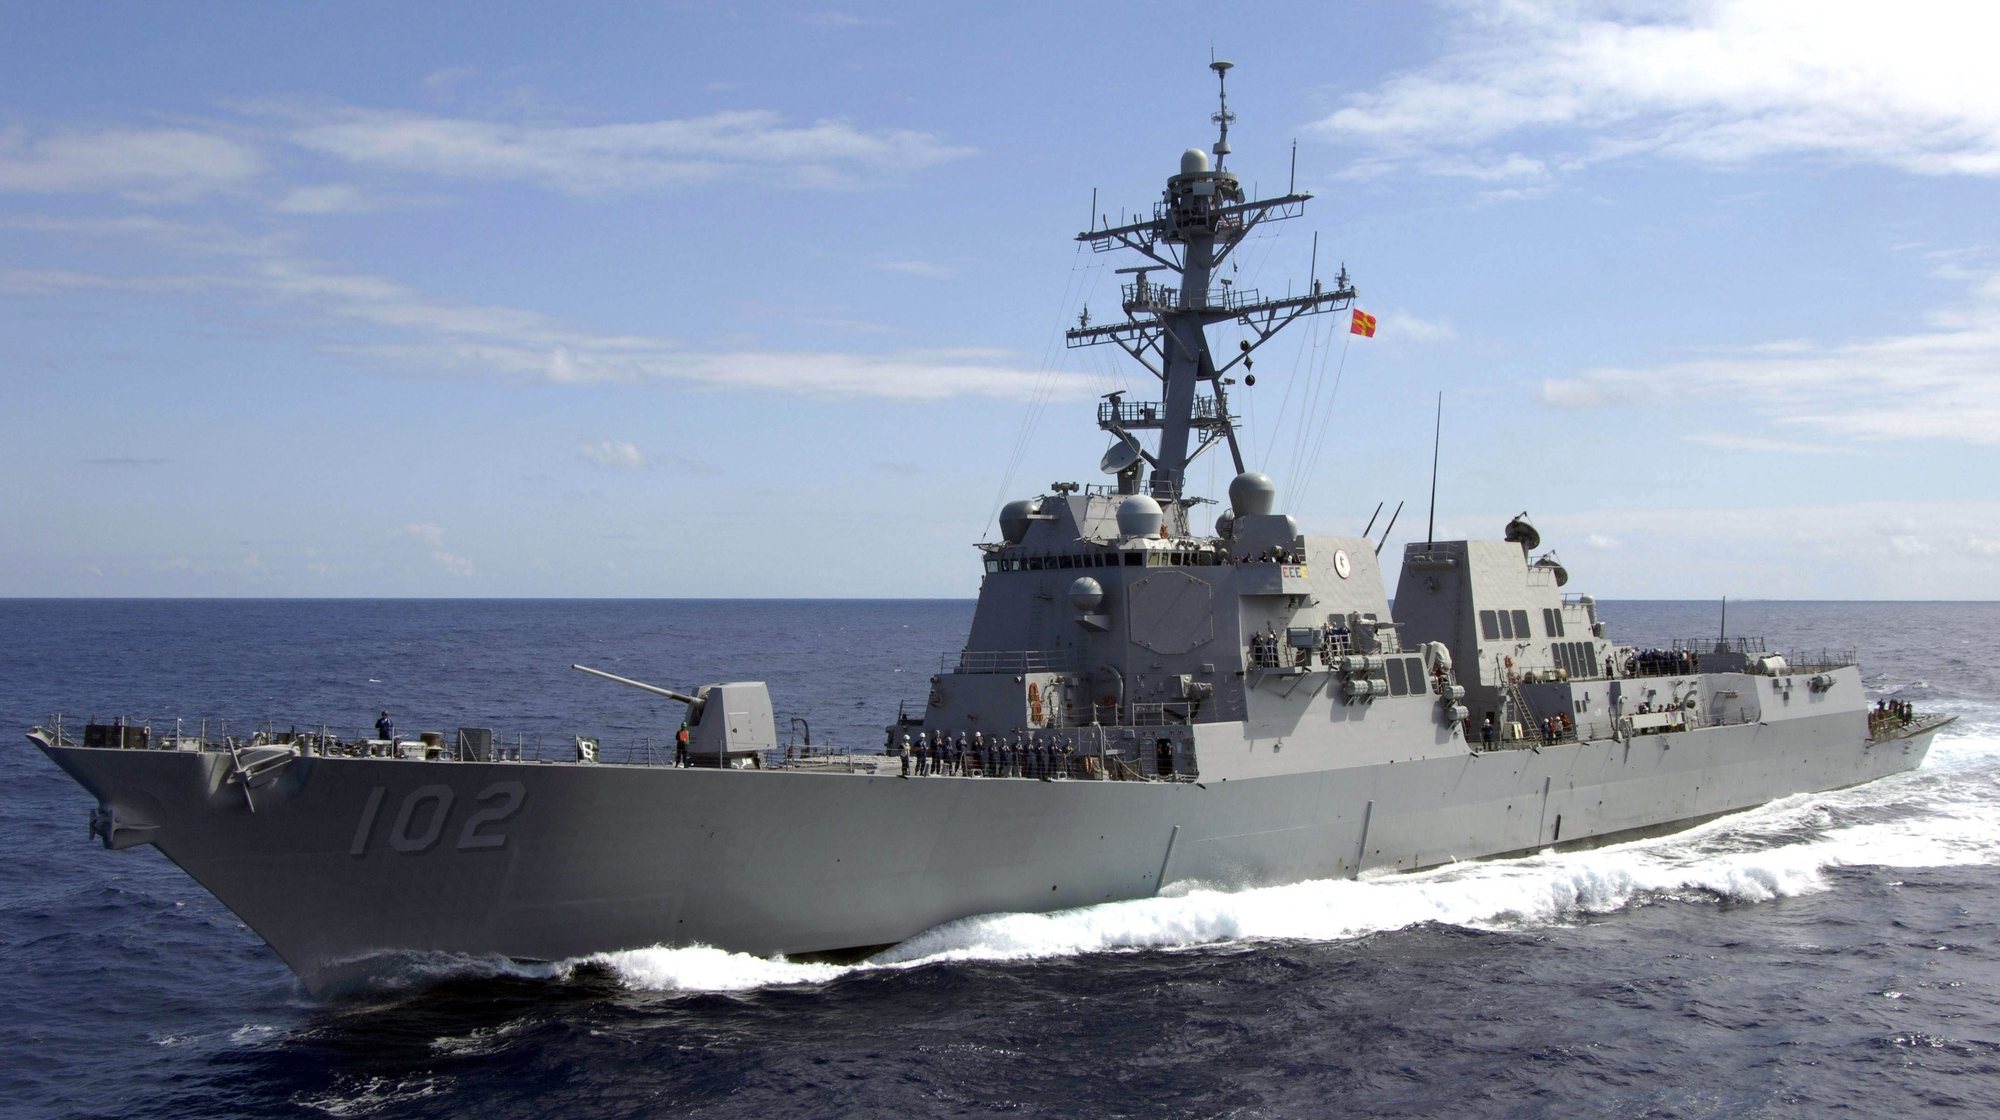 epa04542603 A handout picture made available by the US Navy on 30 December 2014 shows the guided-missile destroyer USS Sampson underway in the Pacific Ocean, 05 August 2009. The USS Sampson is expected to arrive later on 30 December in Indonesian waters to help search for the missing AirAsia flight, the US military said. In a statement issued from Yokosuka, Japan, the military said that the US Pacific Command had ordered the Sampson to the &#039;general search area&#039; in response to a request from the government of Indonesia.  EPA/US NAVY / John Wagner Released/Distributed by Navy Visual News Service 
703-614-9154 HANDOUT EDITORIAL USE ONLY